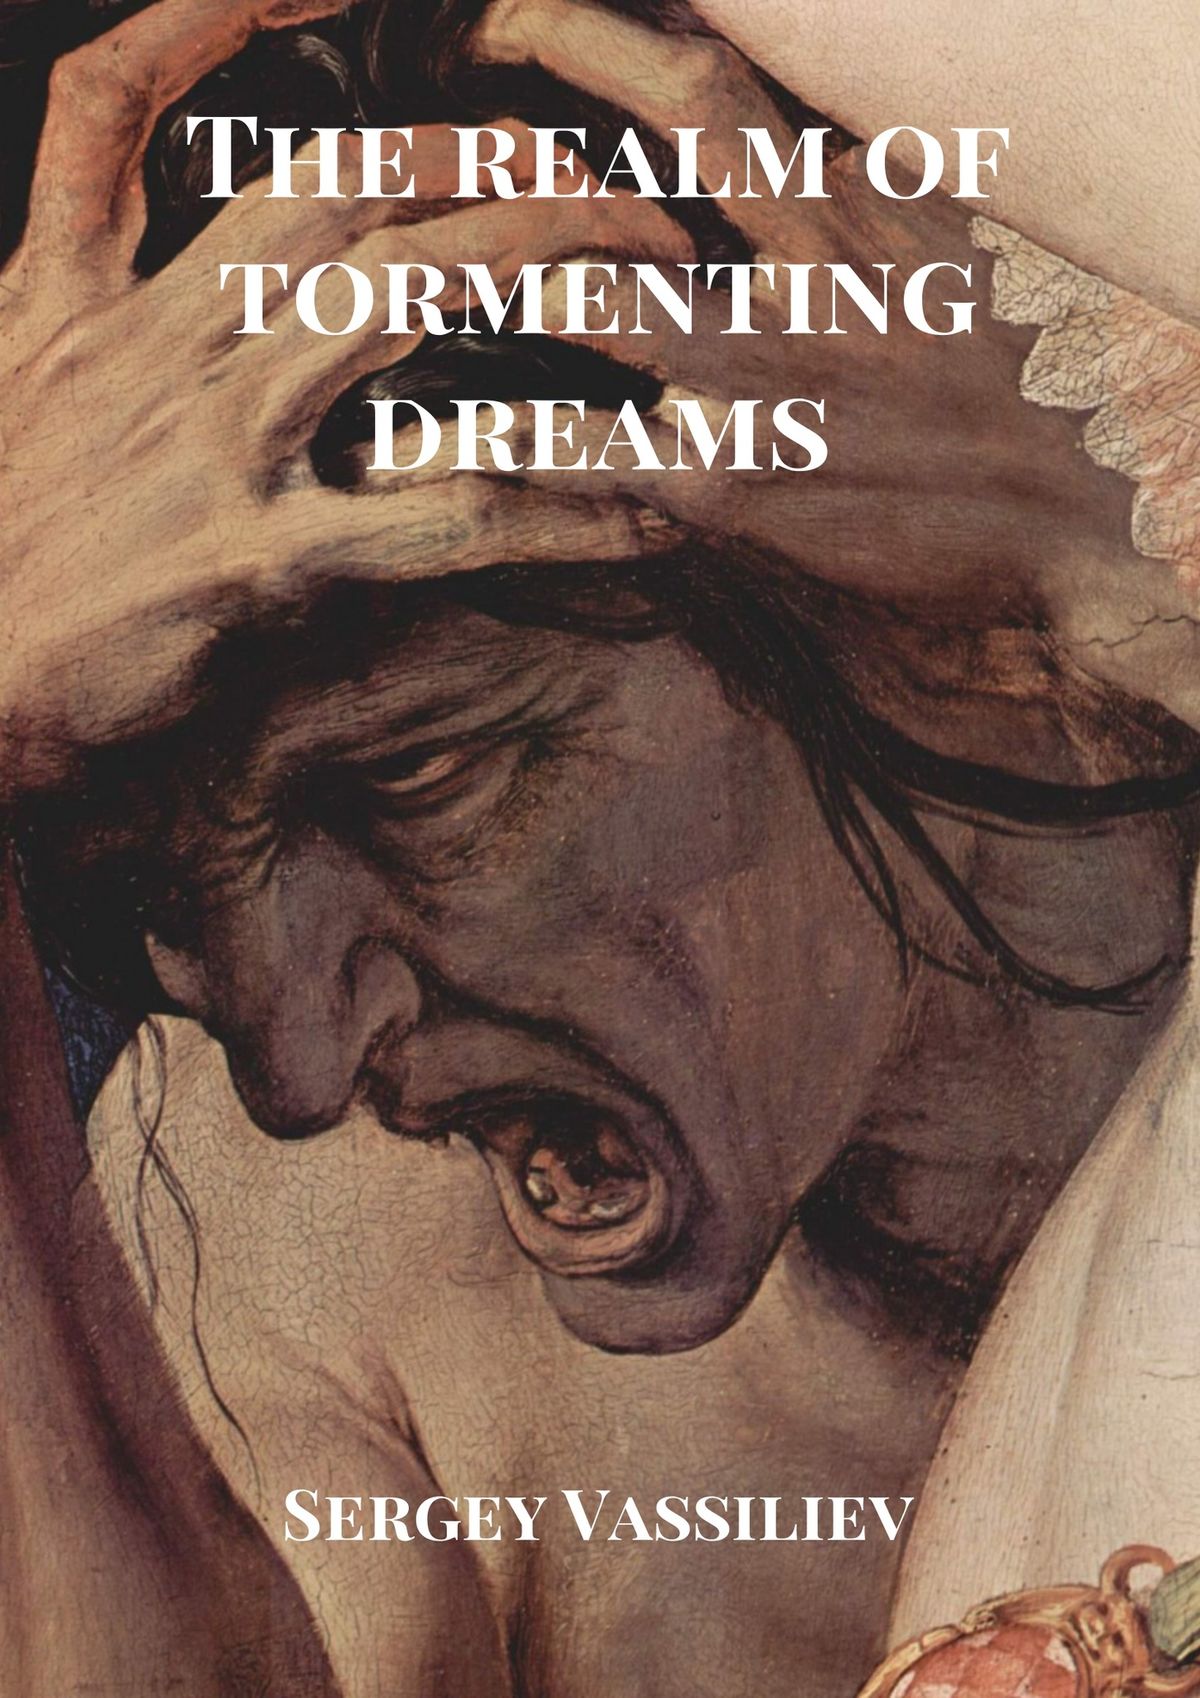 The realm of tormenting dreams